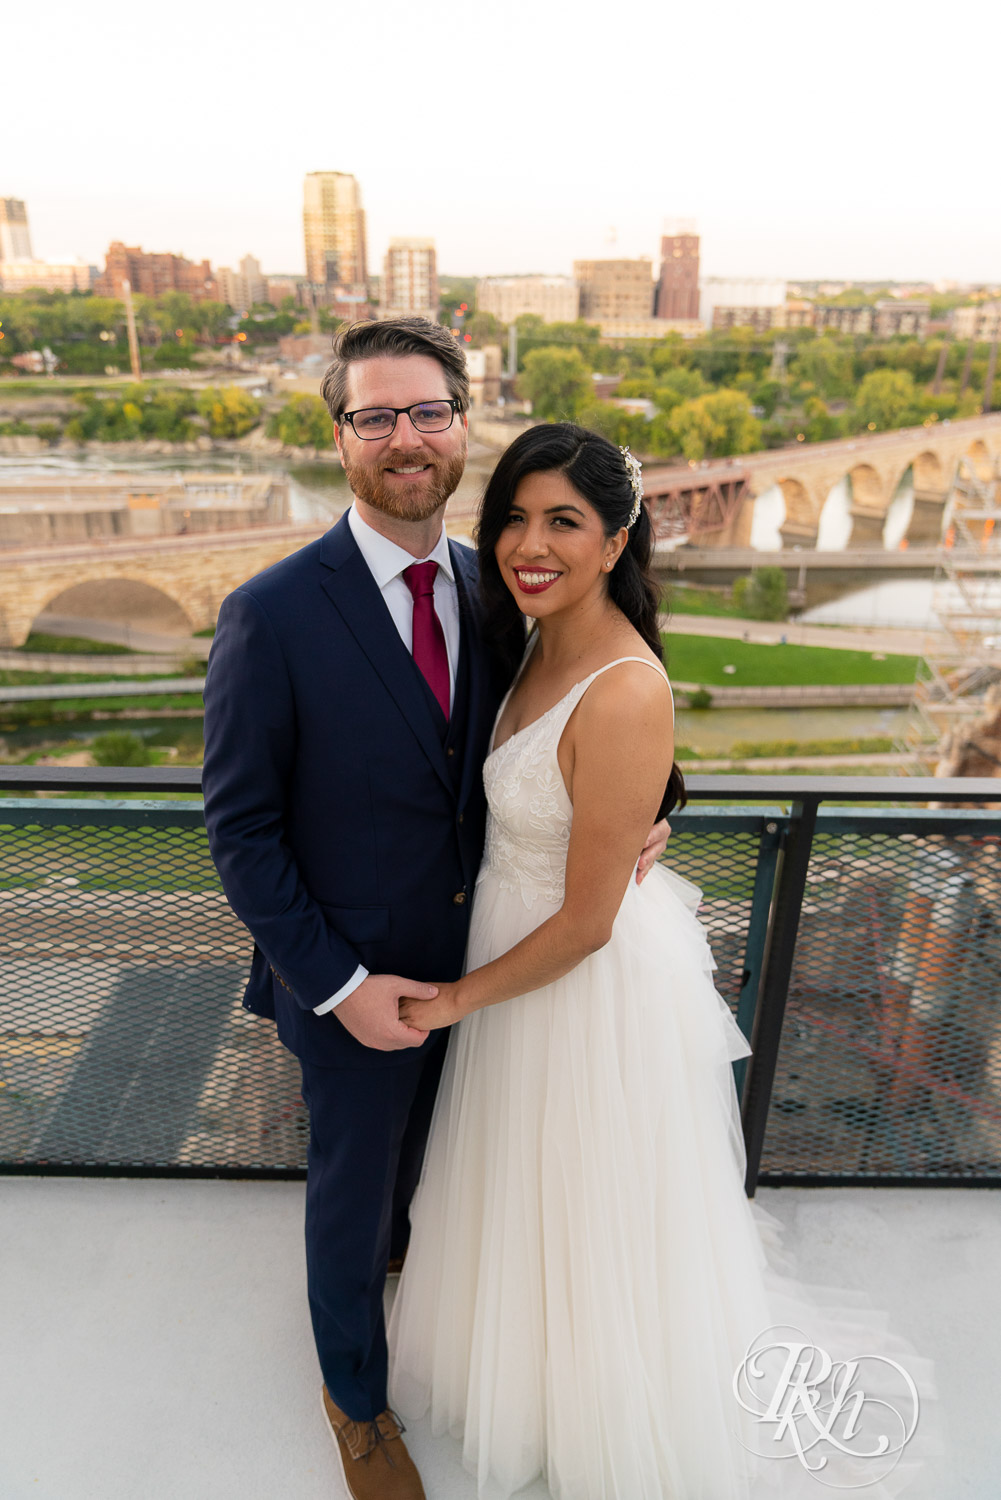 Bride and groom smiling on the roof of Mill City in Minneapolis, Minnesota with the skyline in the background.